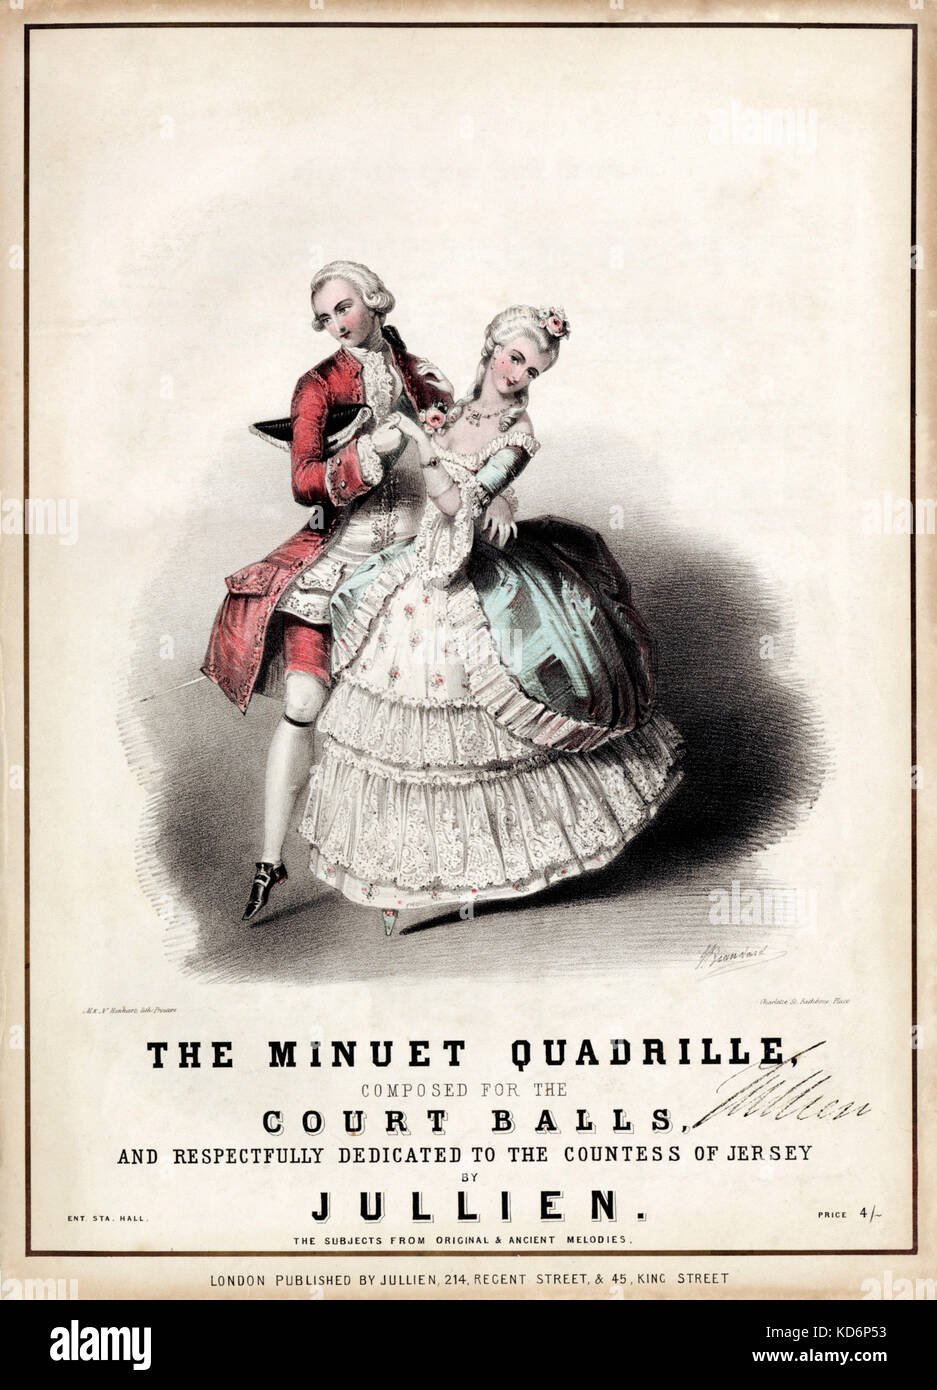 The Minuet Quadrille composed for the Court Balls and respectfully dedicated to the Countess of Jersey by Julien.  Illustrated by Brandard. Court dance eighteenth century. Published by Julien, London. Man wearing wig . Shows steps. Stock Photo